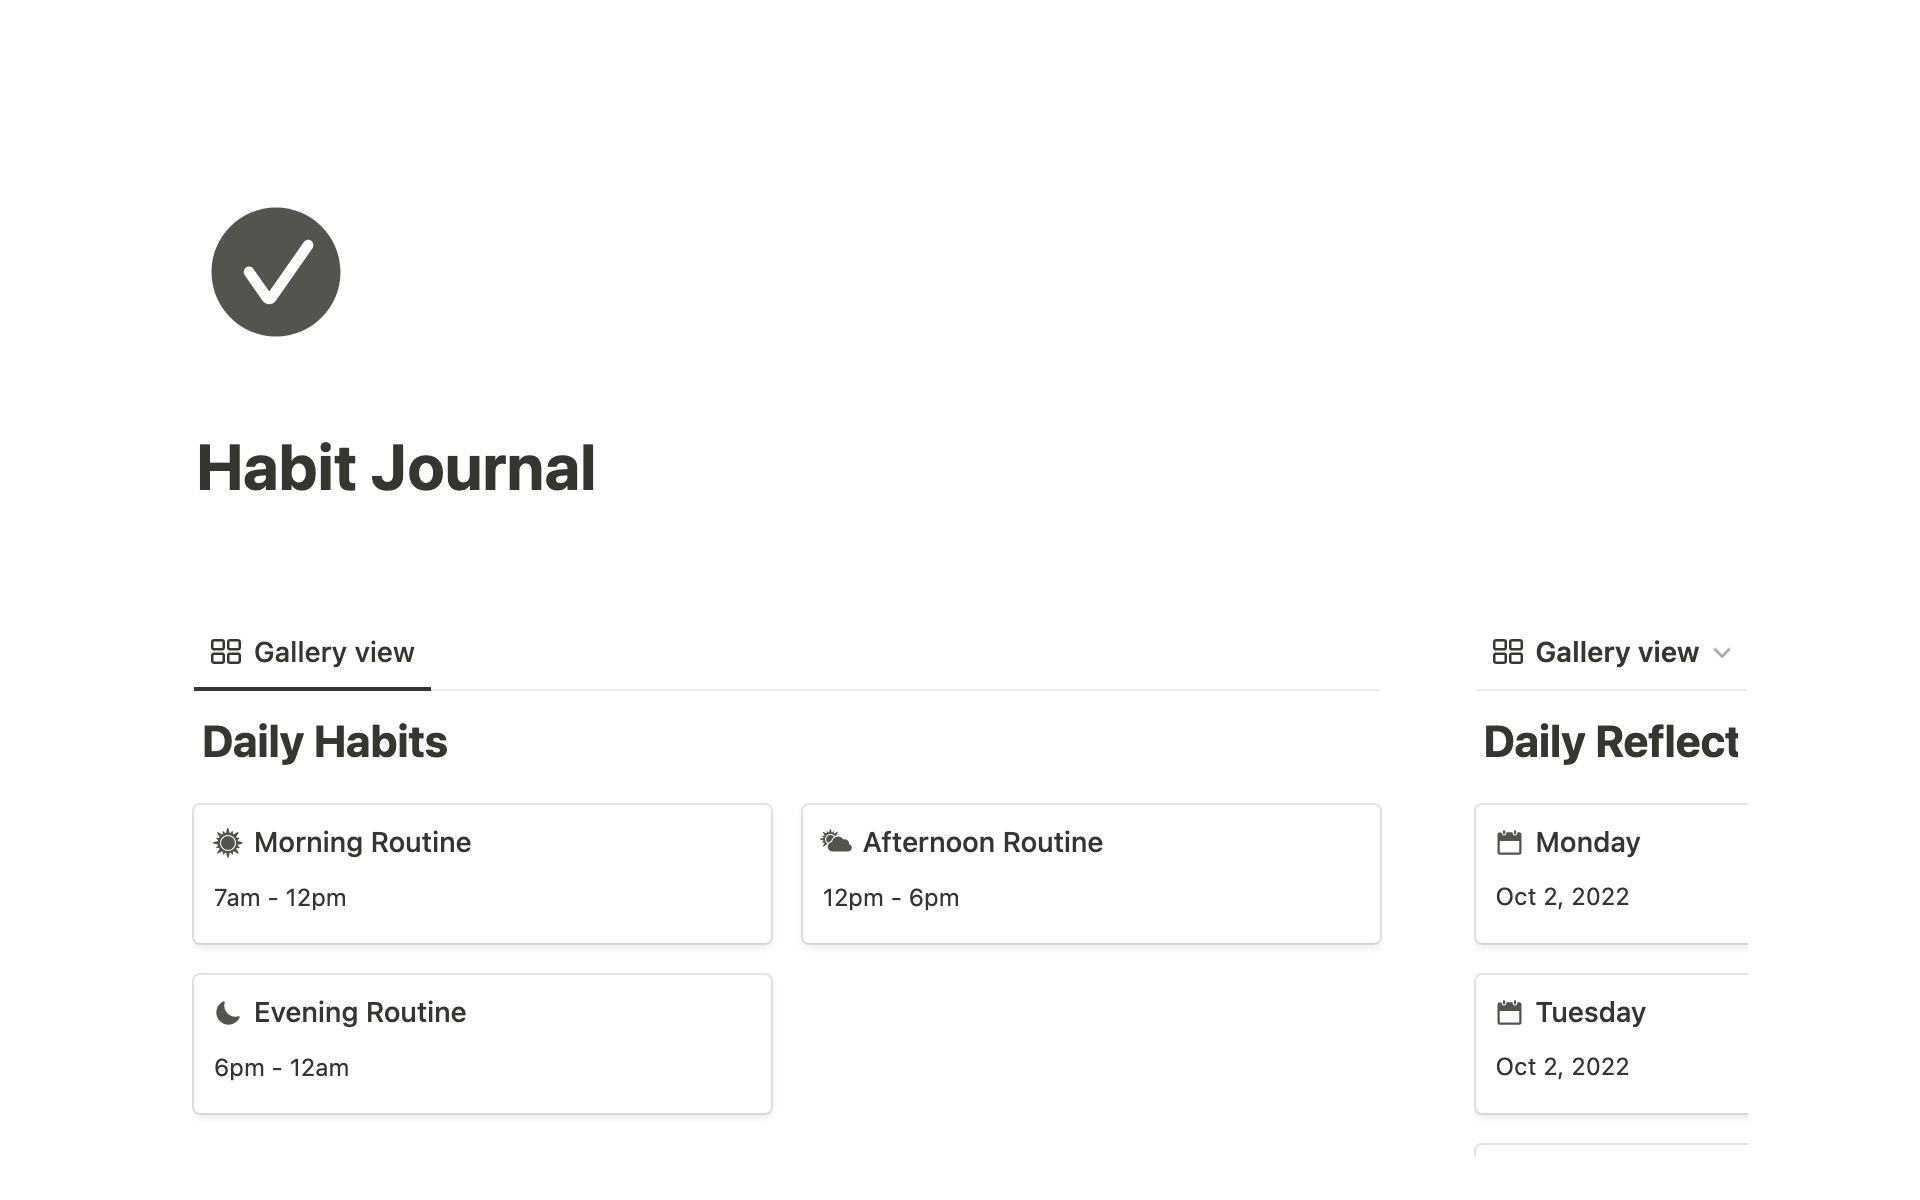 Habit Journal is your daily companion for routines, habits and daily reflections.